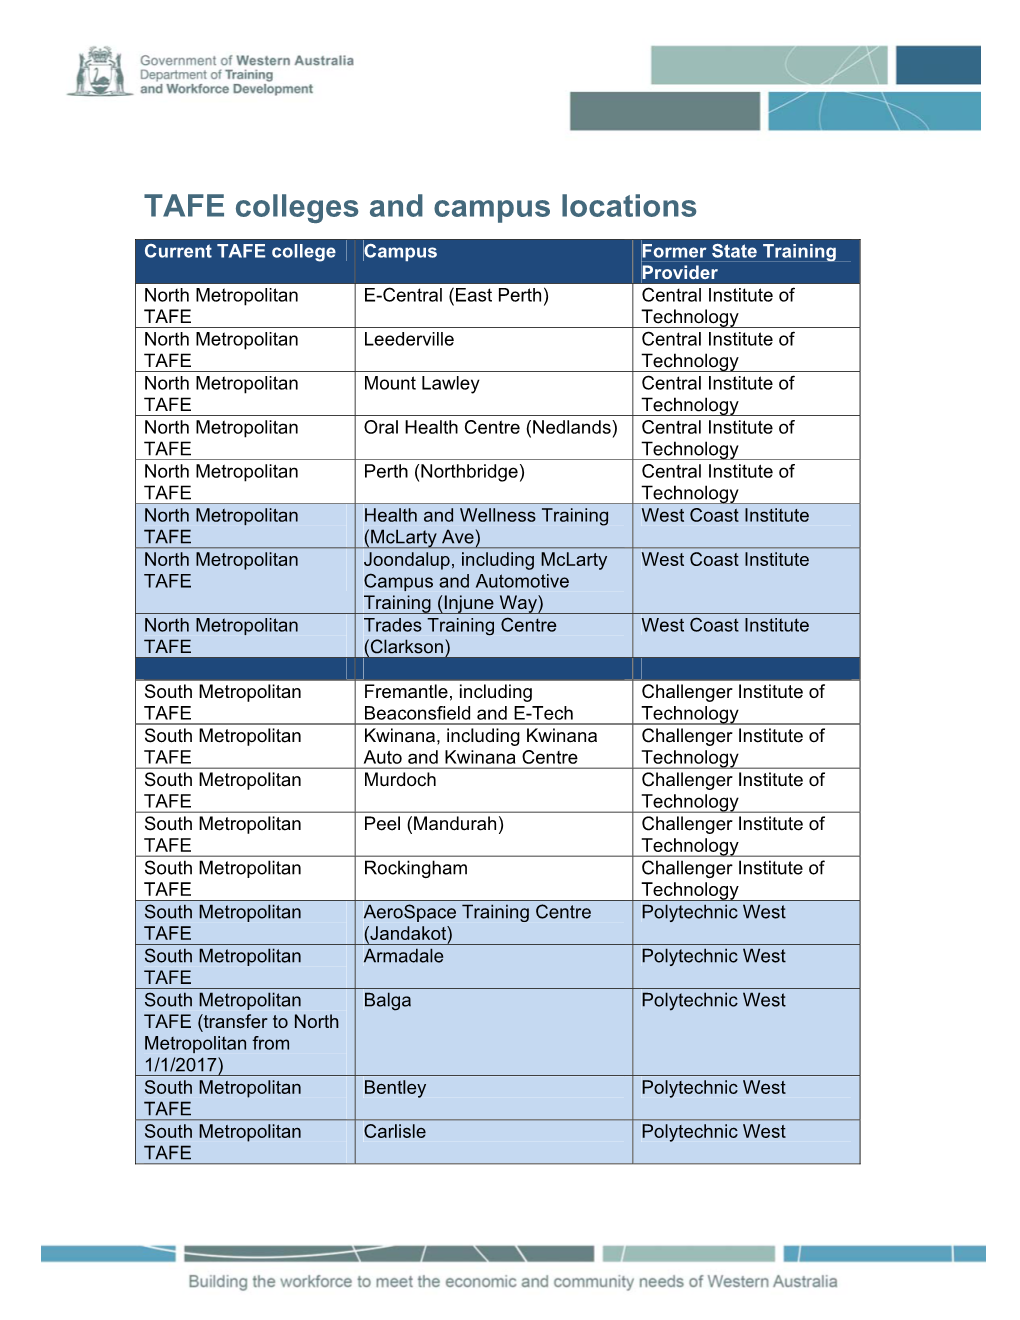 TAFE Colleges and Campus Locations